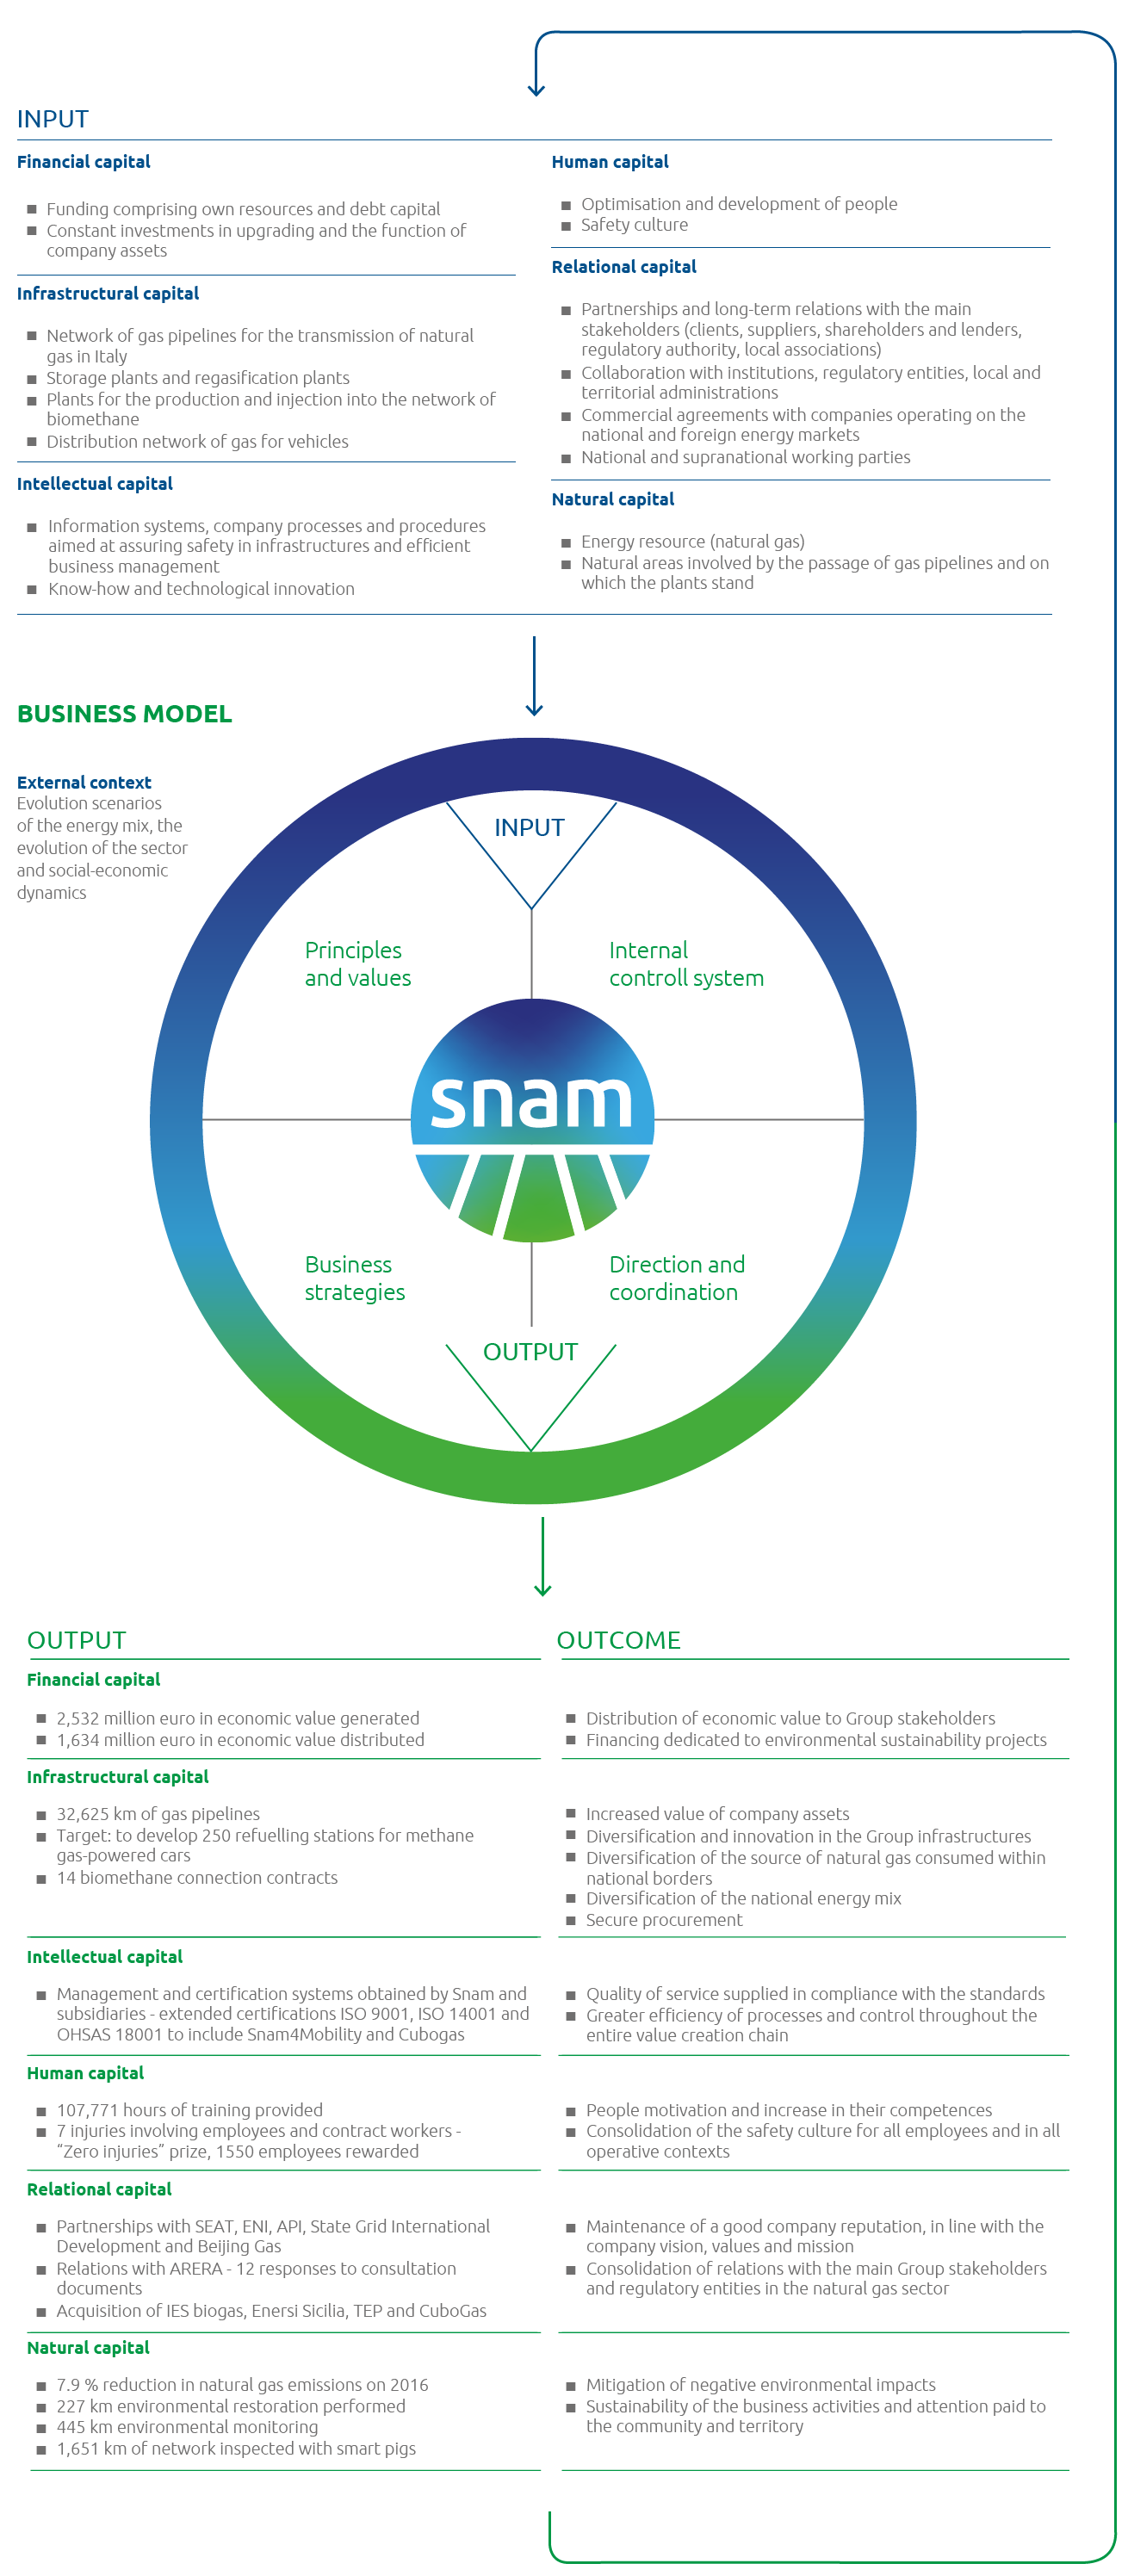 Snam's business model (graphic)